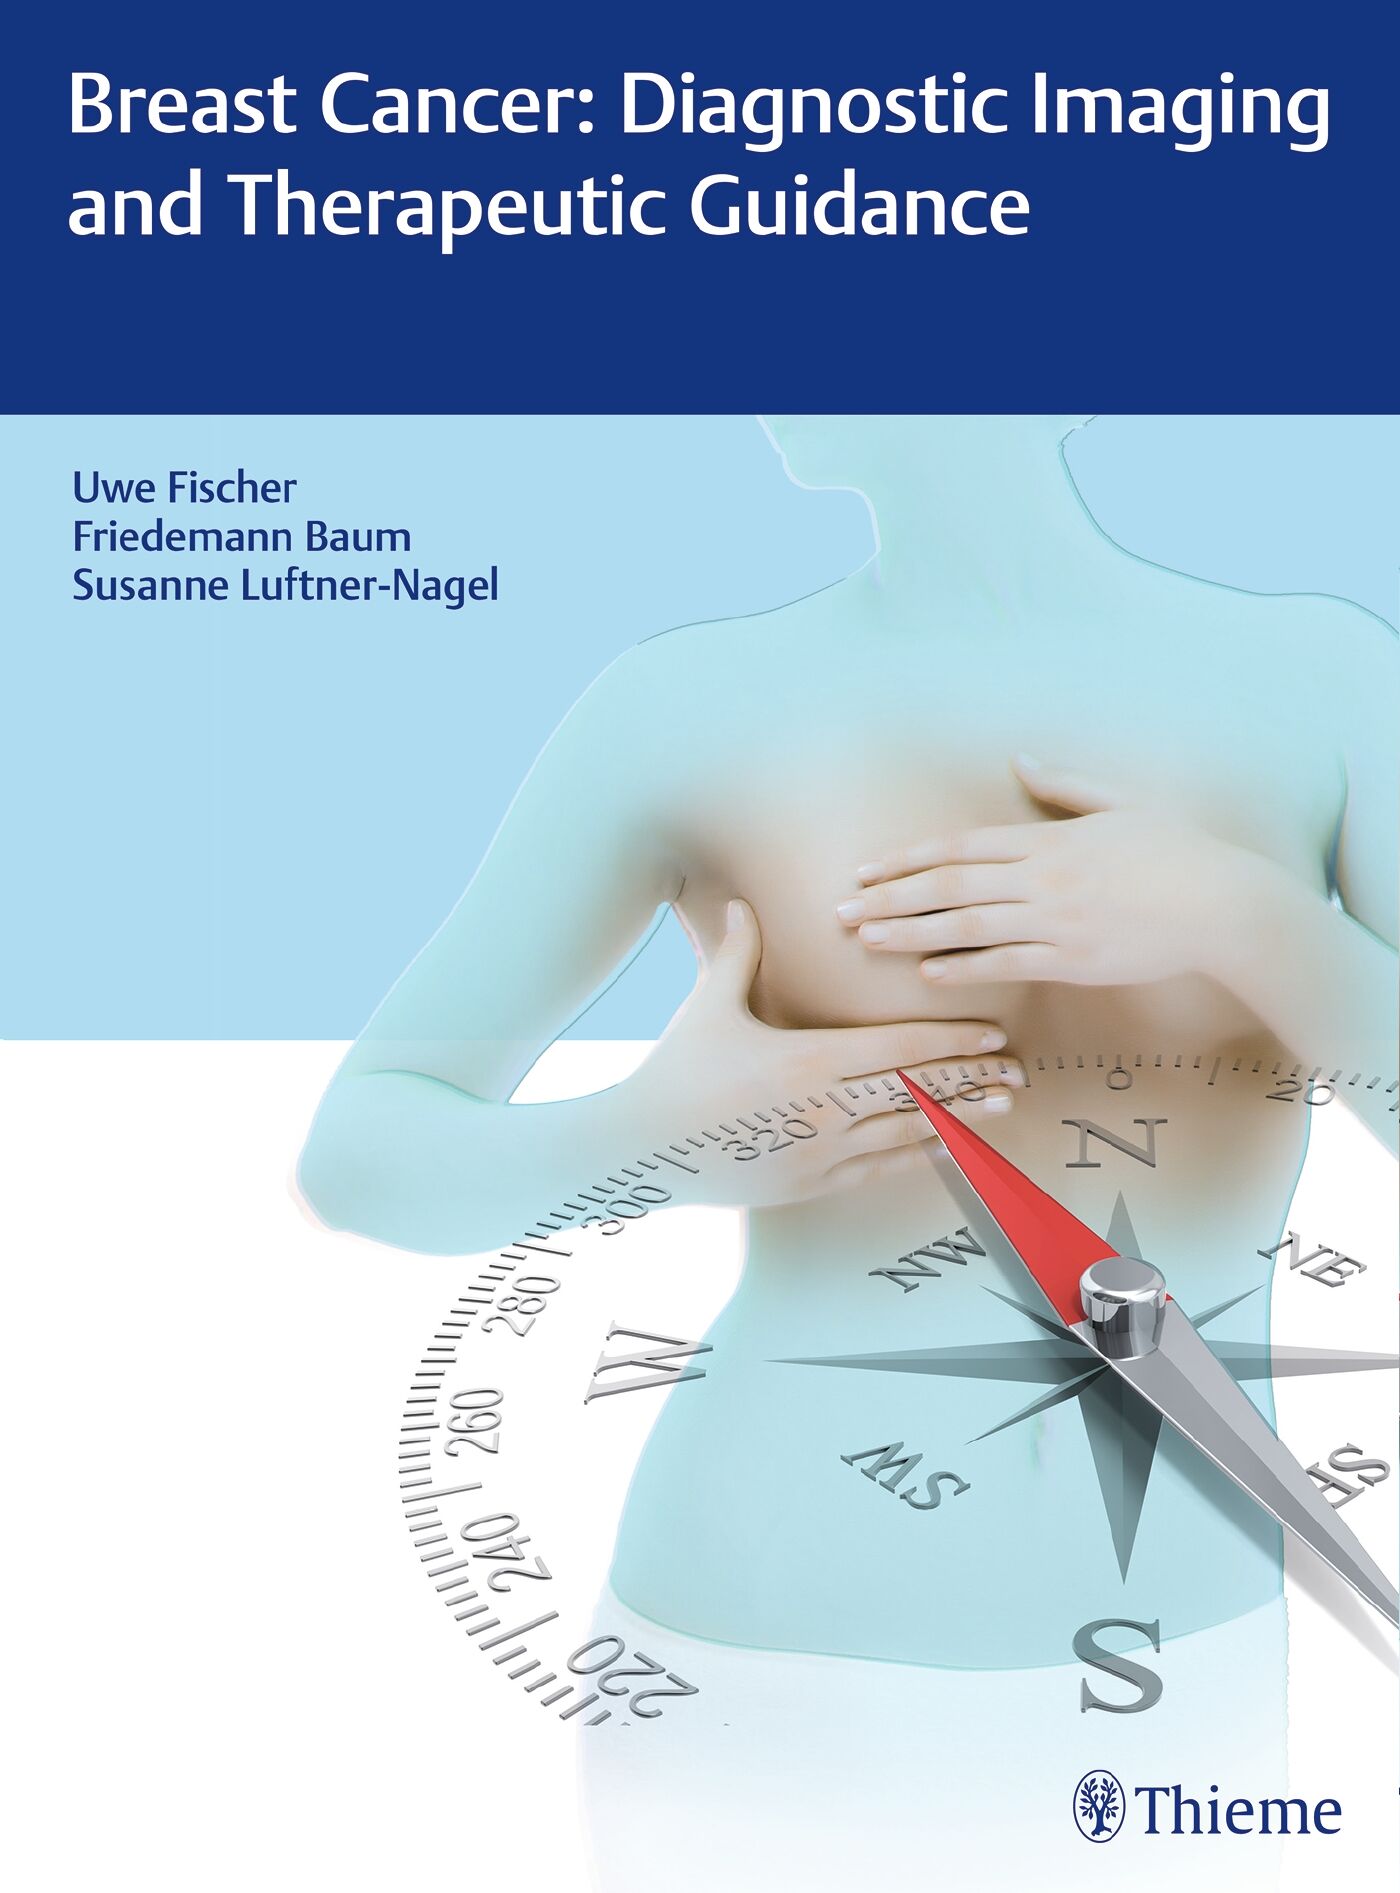 Breast Cancer: Diagnostic Imaging and Therapeutic Guidance, 9783132019317